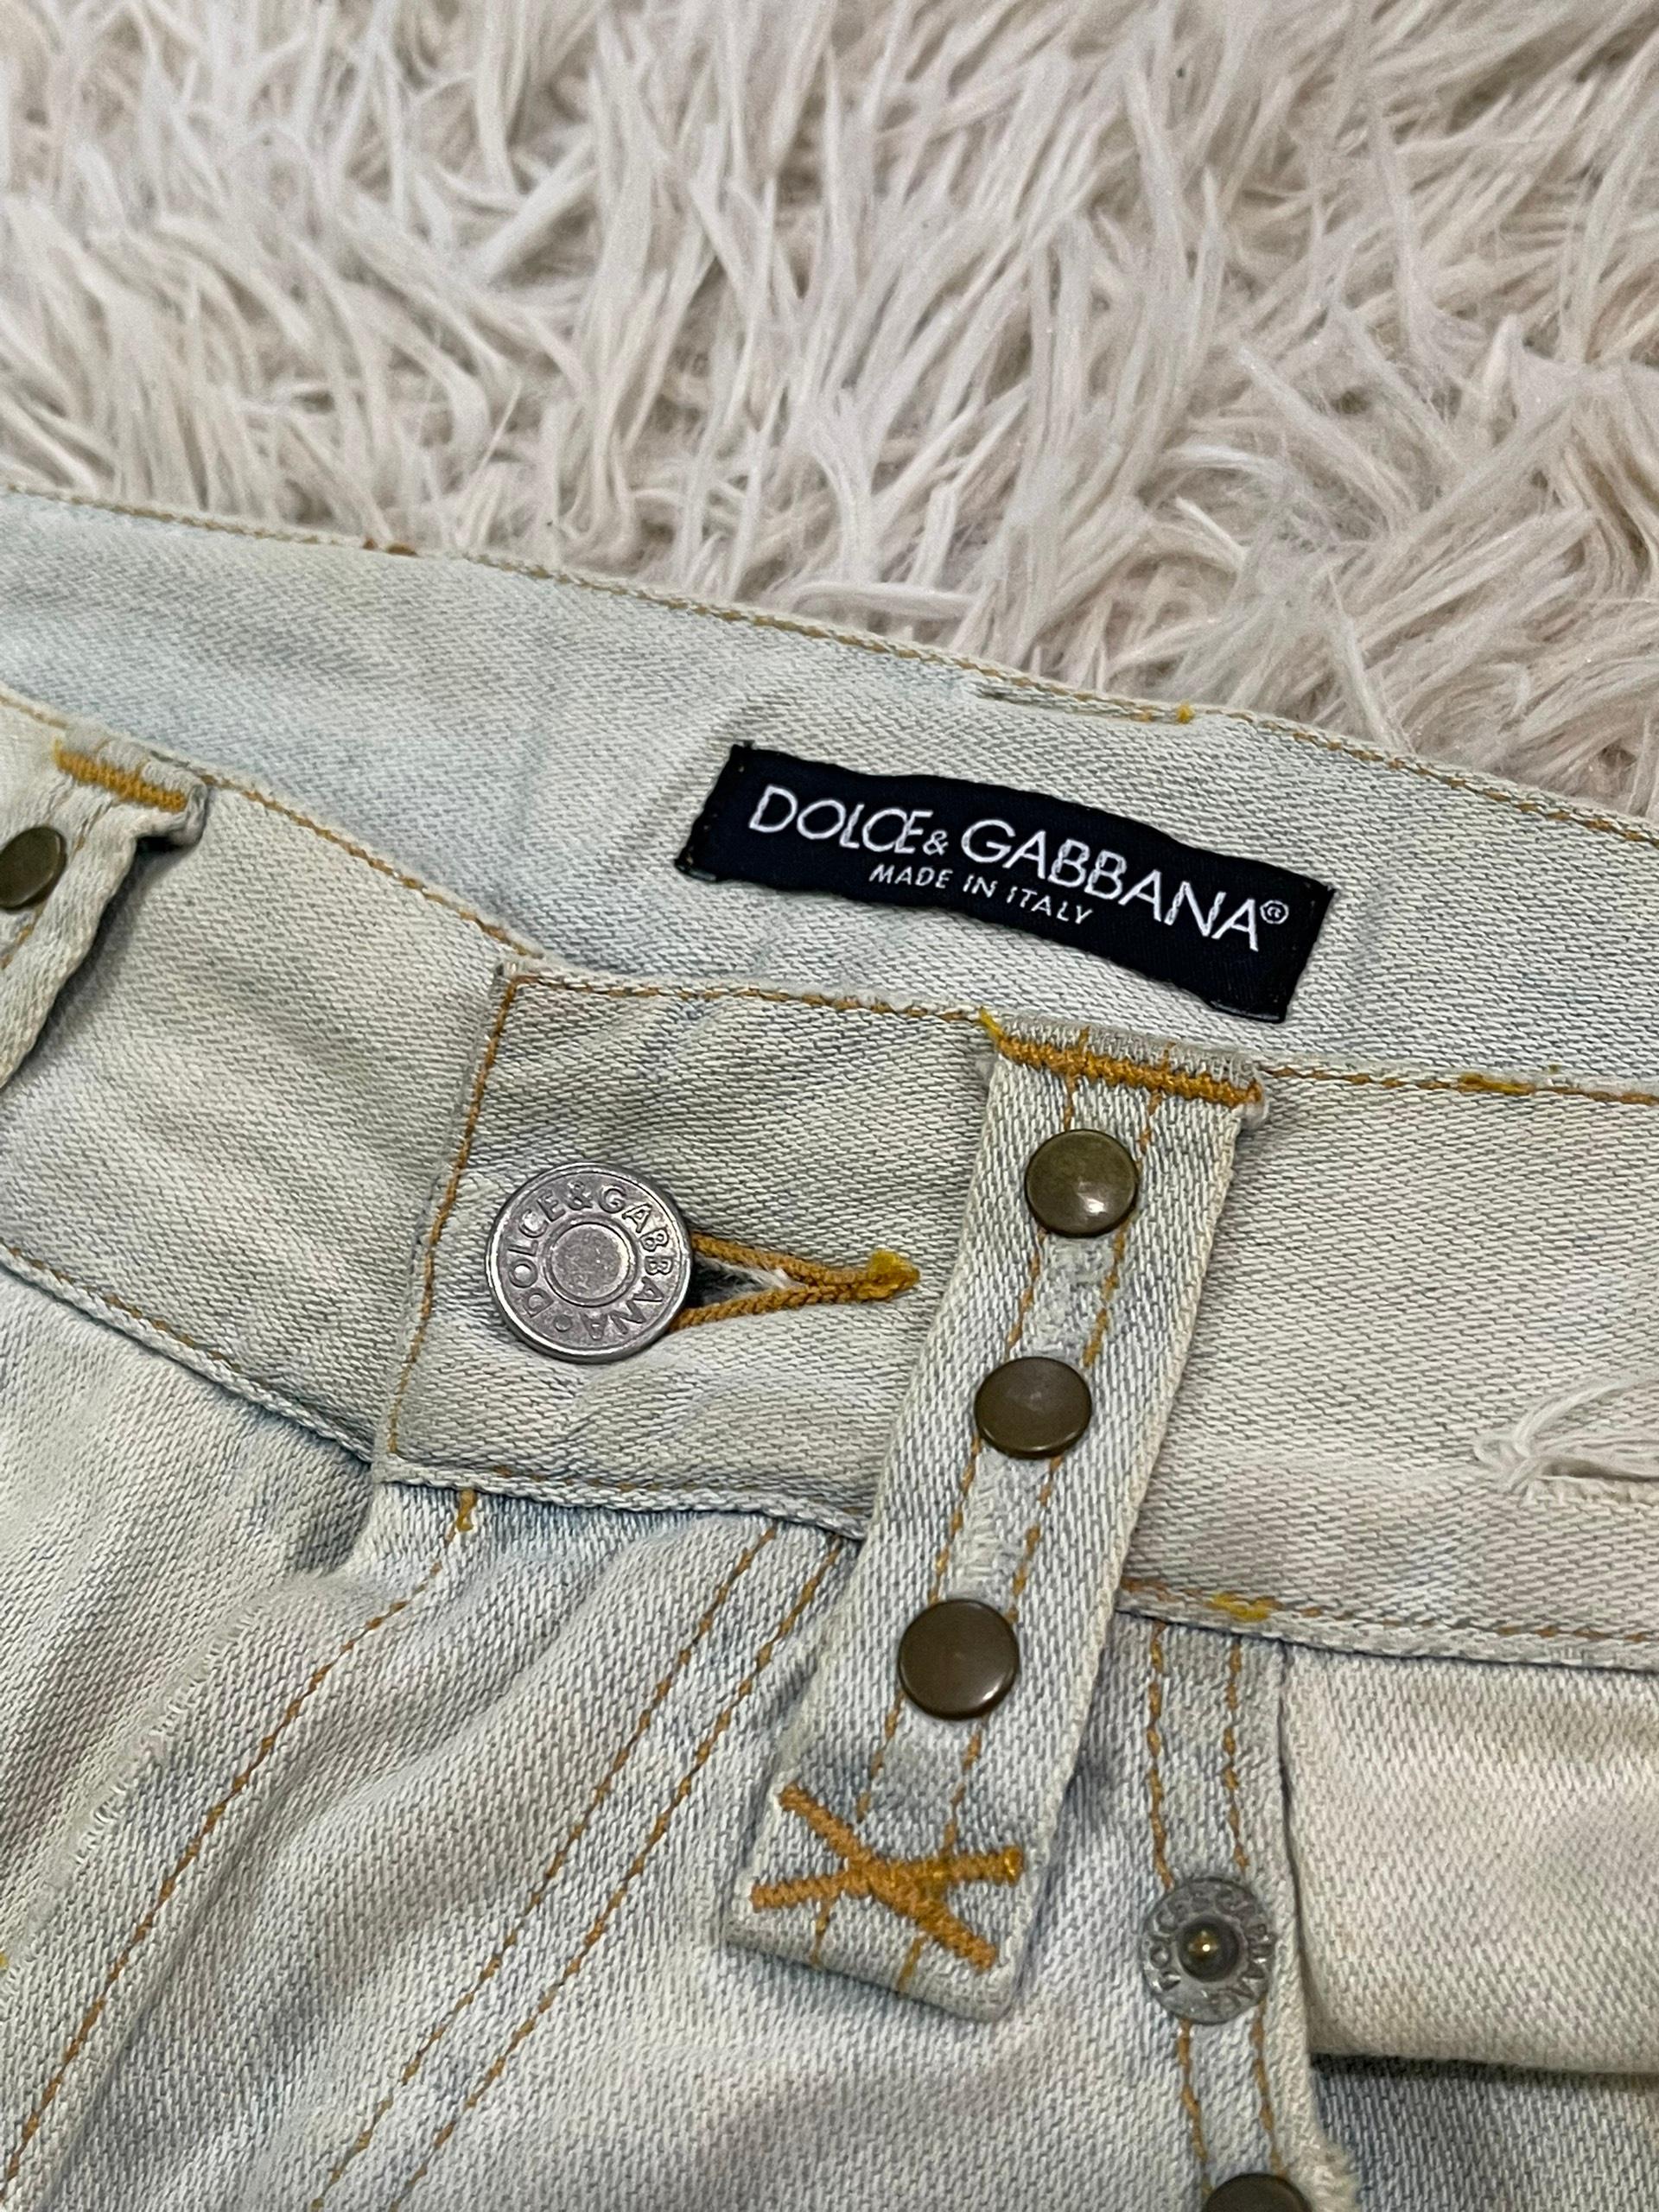 Dolce Gabbana S/S2006 Worn and Distressed Leopard Jeans In Good Condition In Tương Mai Ward, Hoang Mai District